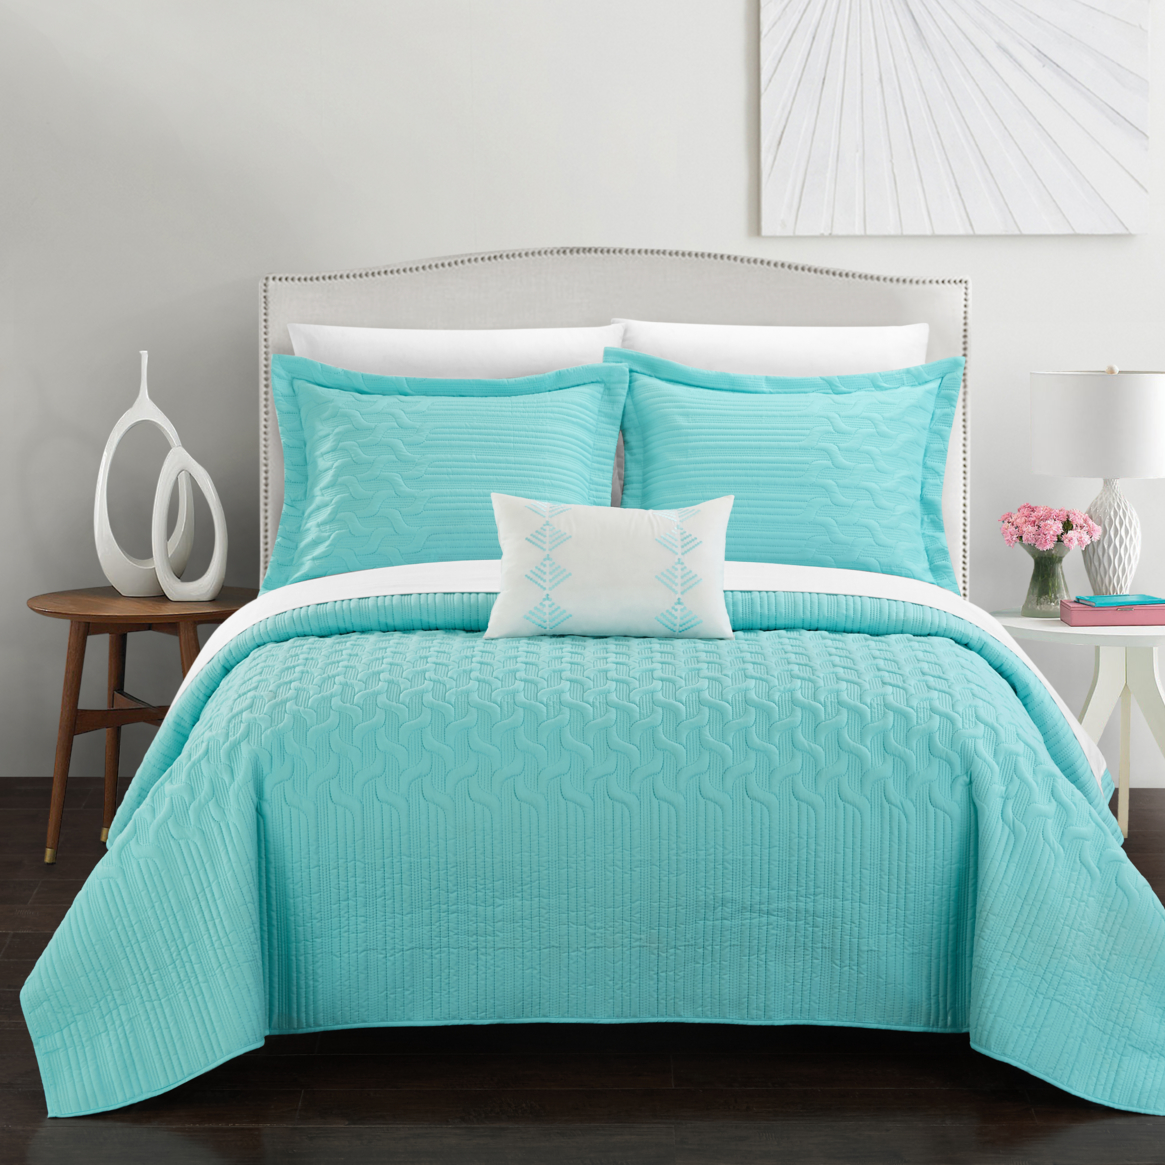 Shaliya 8 Or 6 Piece Quilt Cover Set Interlaced Vine Pattern Quilted Bed In A Bag - Aqua, King